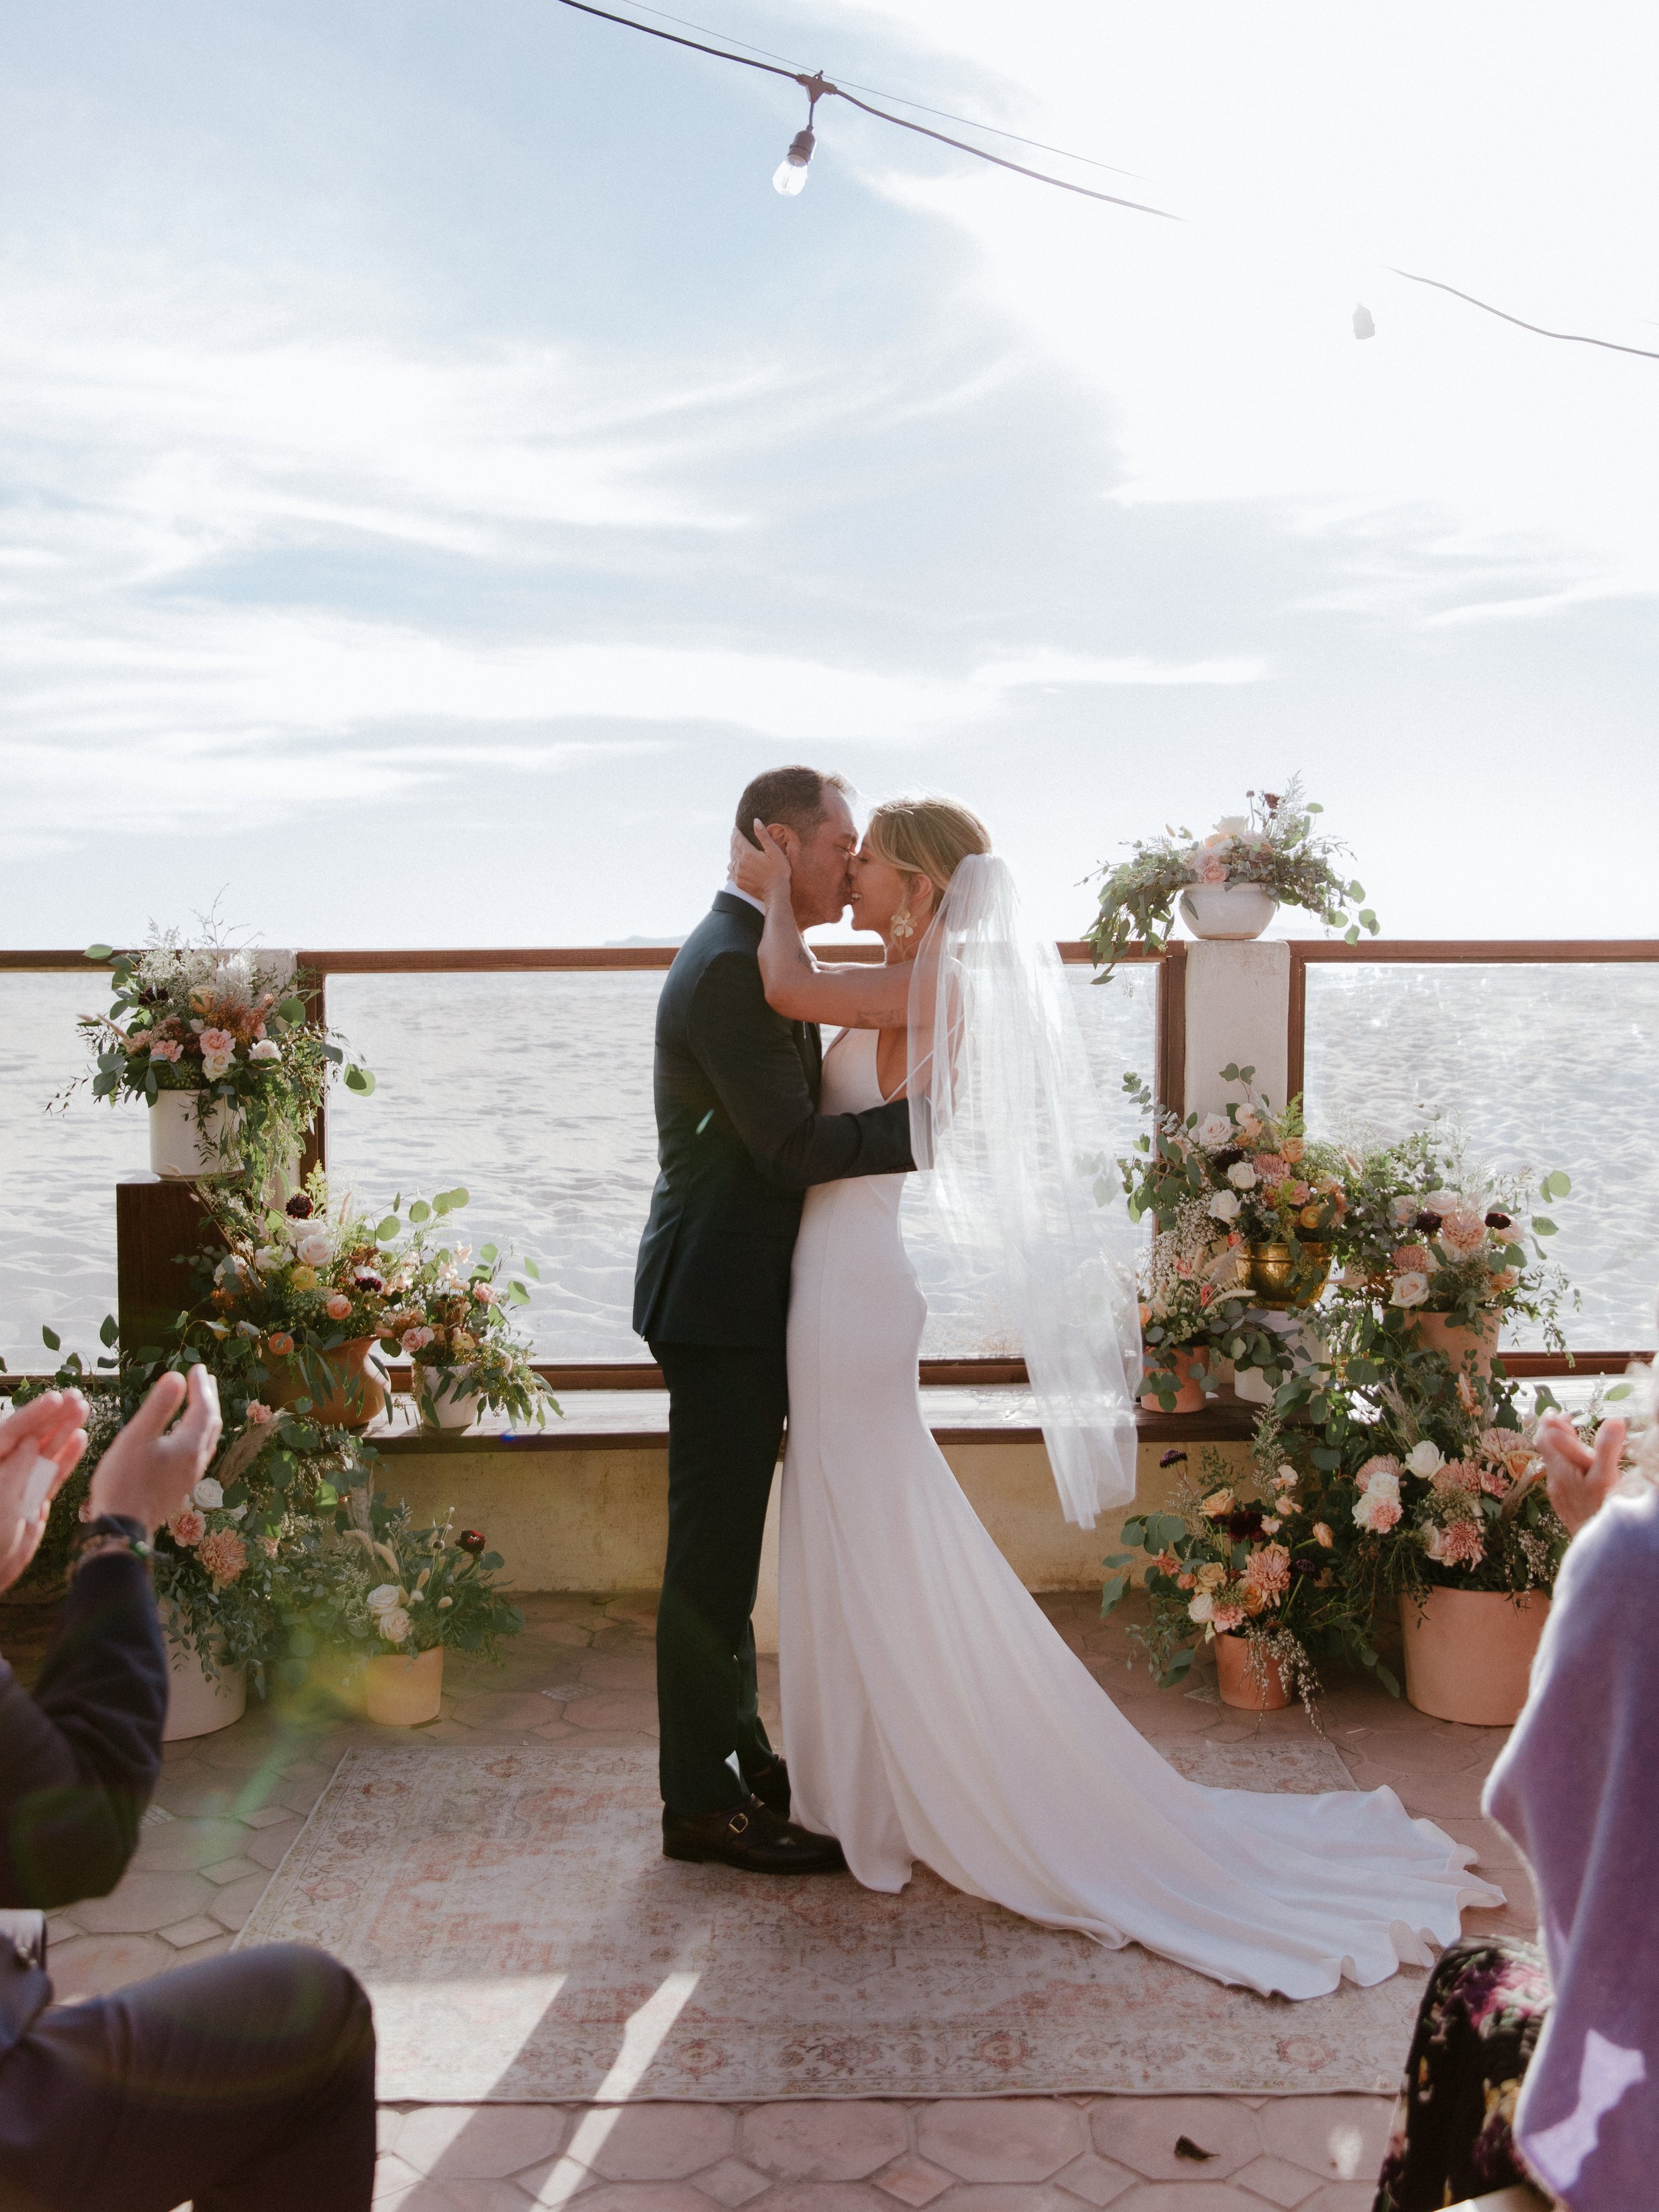 www.santabarbarawedding.com | Chris J. Evans | Paul Smith Suits | Bride and Groom Kissing at the Ceremony 